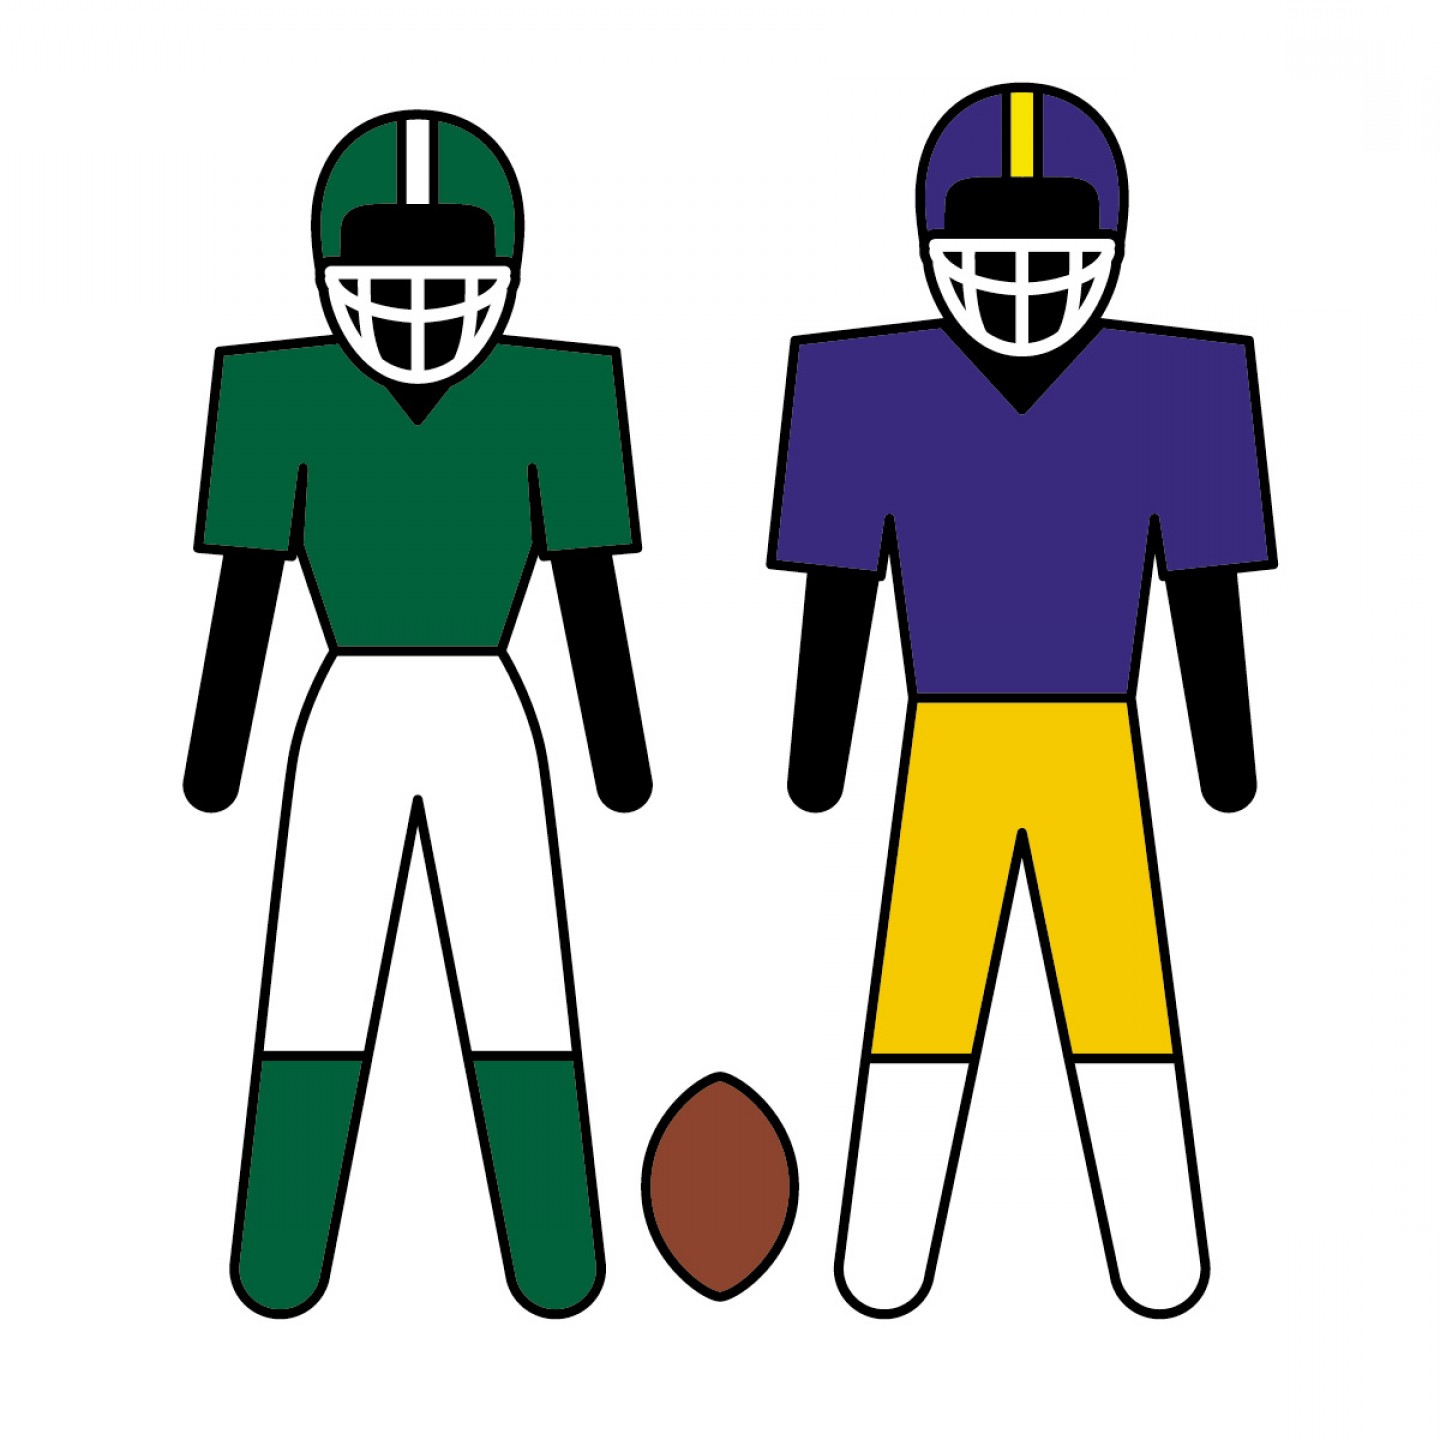 Best Free Animated Football Clipart Image.